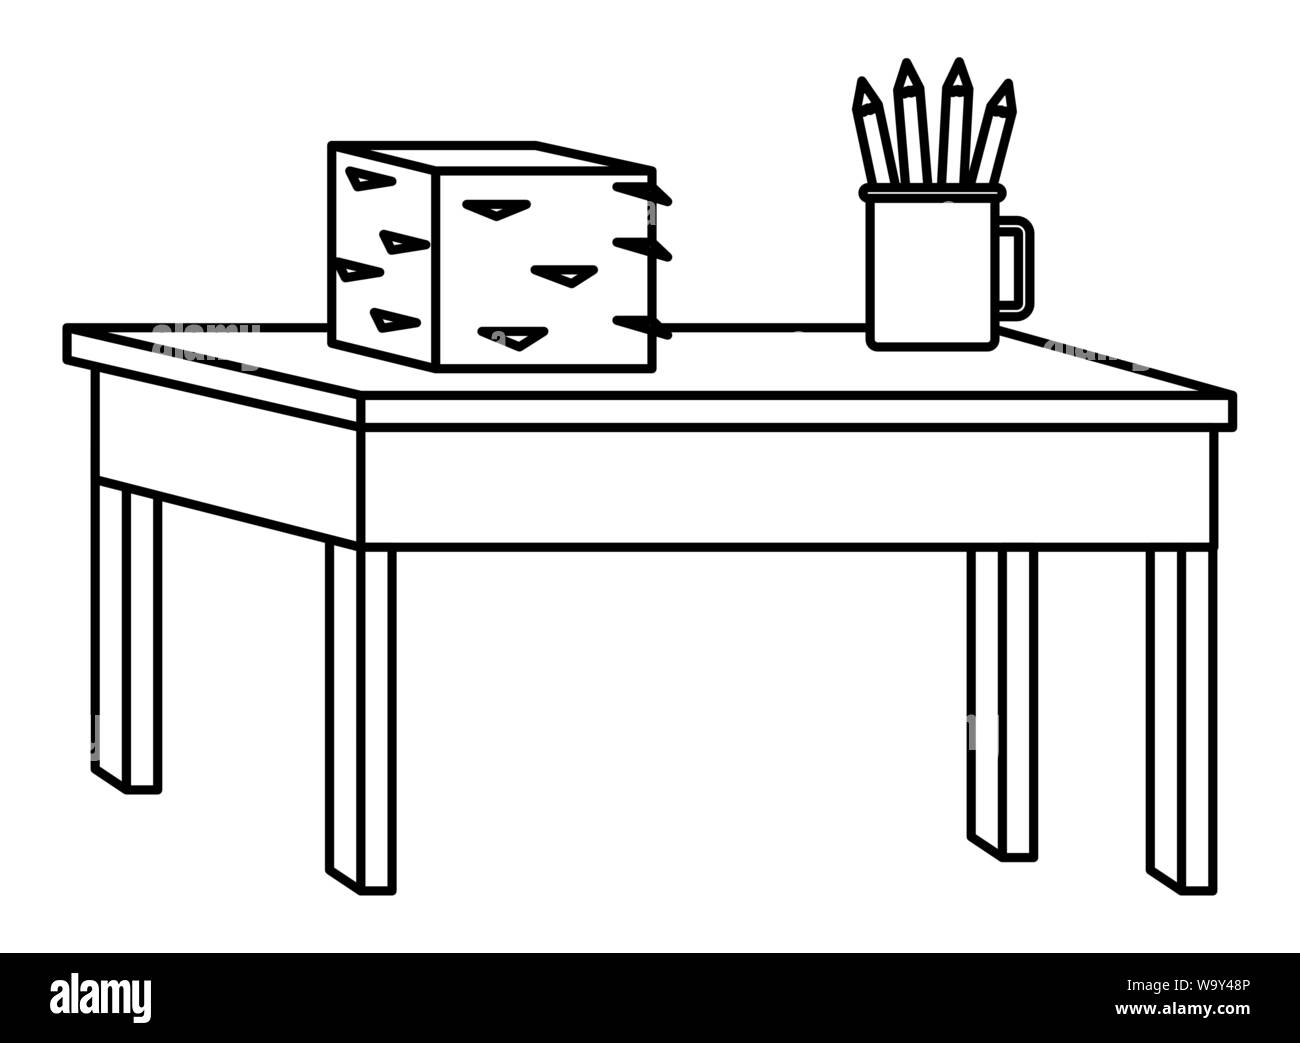 Desk with documents piled and pencils in cup in black and white Stock Vector